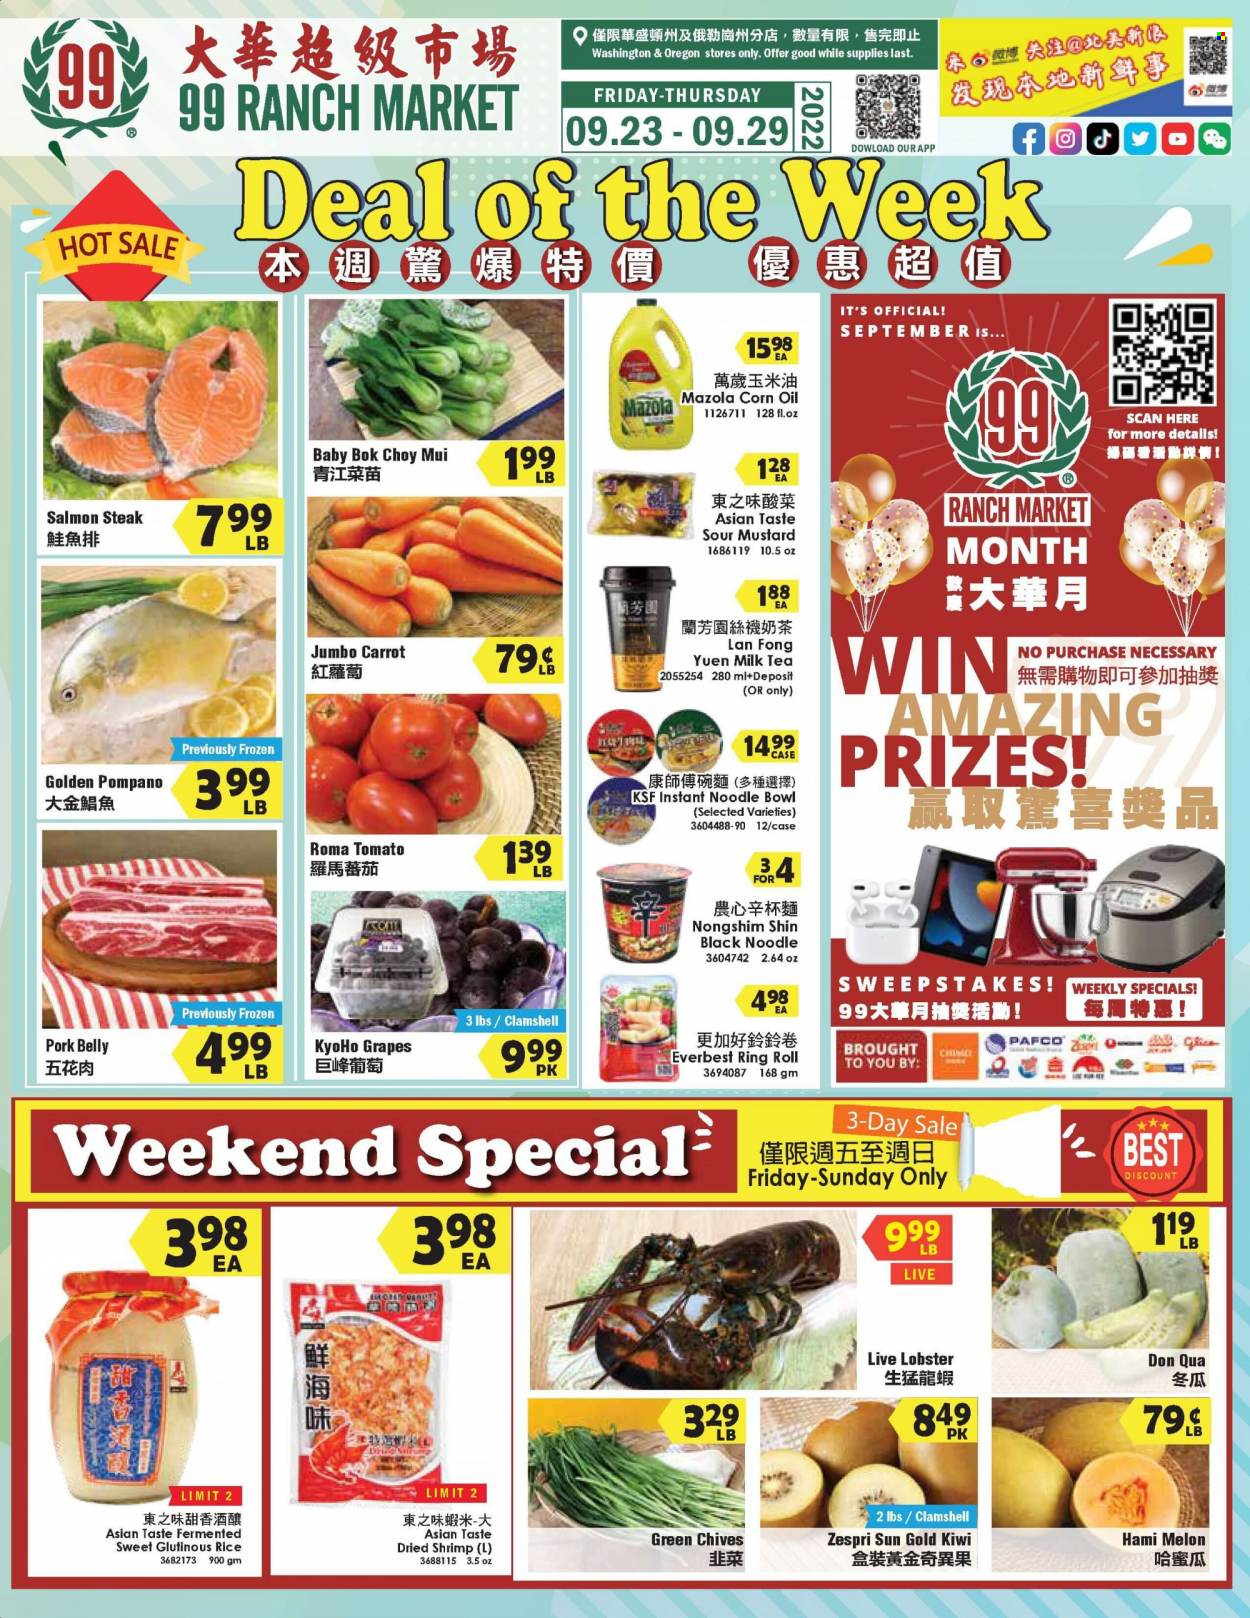 thumbnail - 99 Ranch Market Flyer - 09/23/2022 - 09/29/2022 - Sales products - bok choy, tomatoes, chives, grapes, kiwi, lobster, salmon, pompano, shrimps, Ring Roll, noodles, milk, rice, mustard, corn oil, tea, steak, pork belly, pork meat, bowl, melons. Page 1.